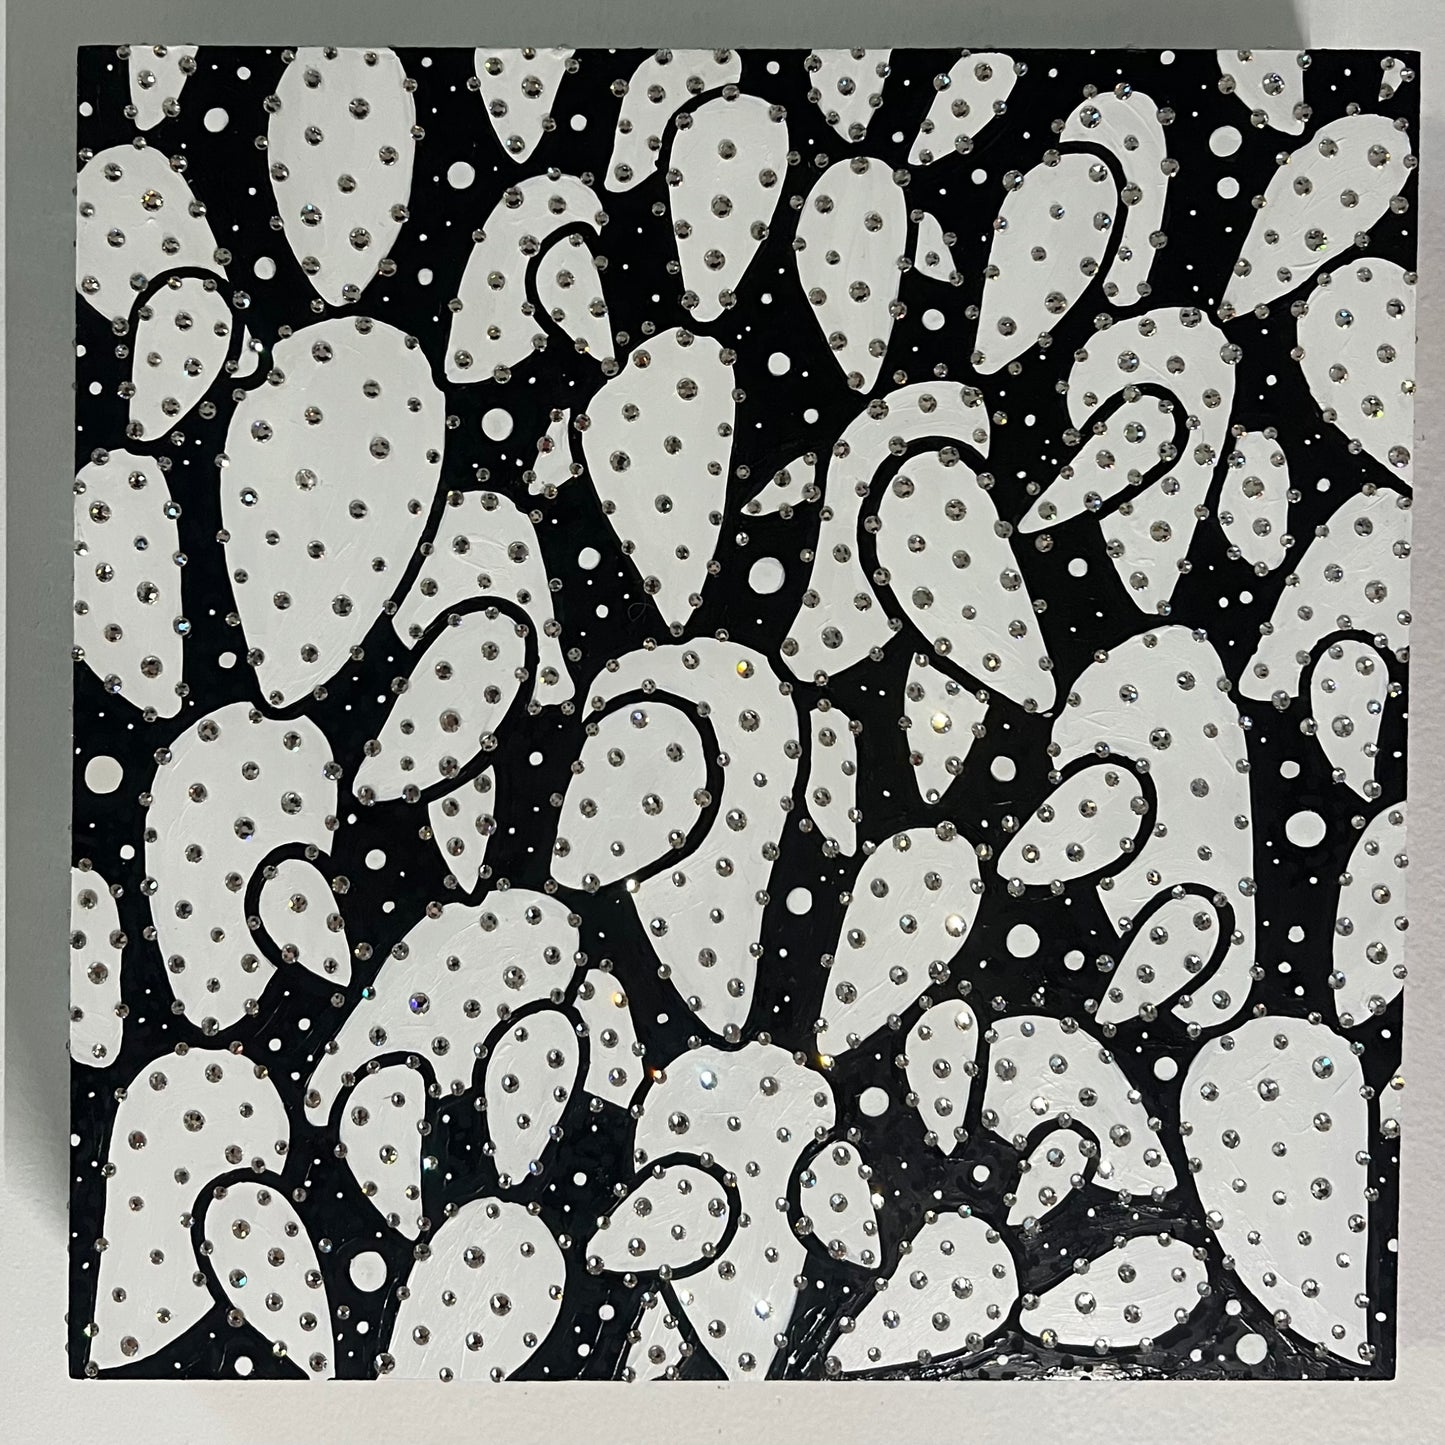 "Prickly Pear Cut" by Will Heron - 12x12